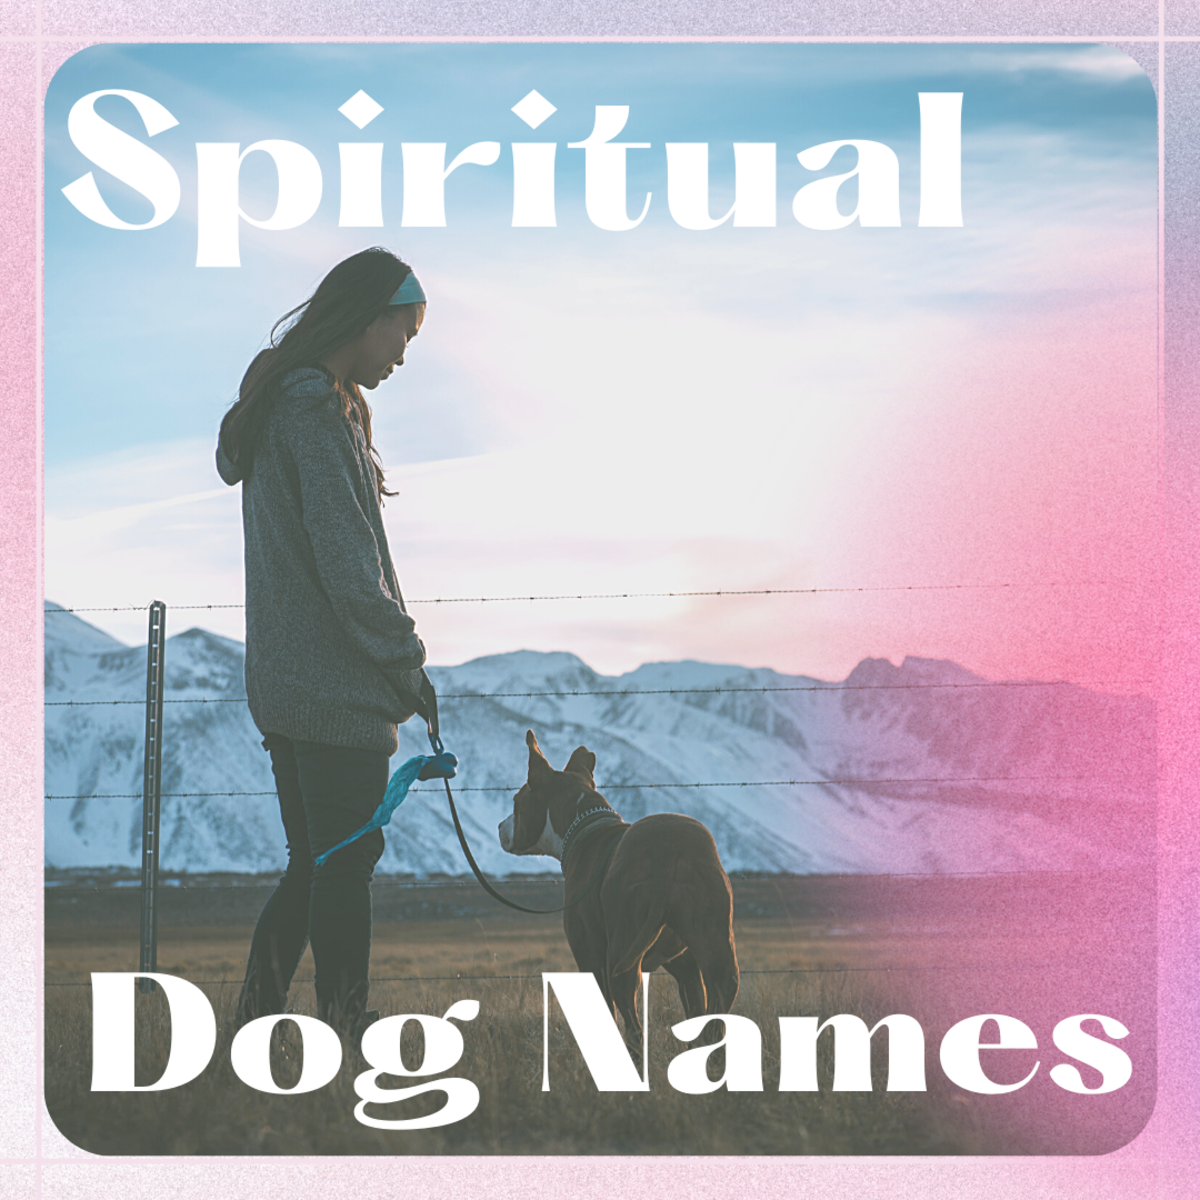 140 Meaningful, Mystical and Spiritual Names for Dogs